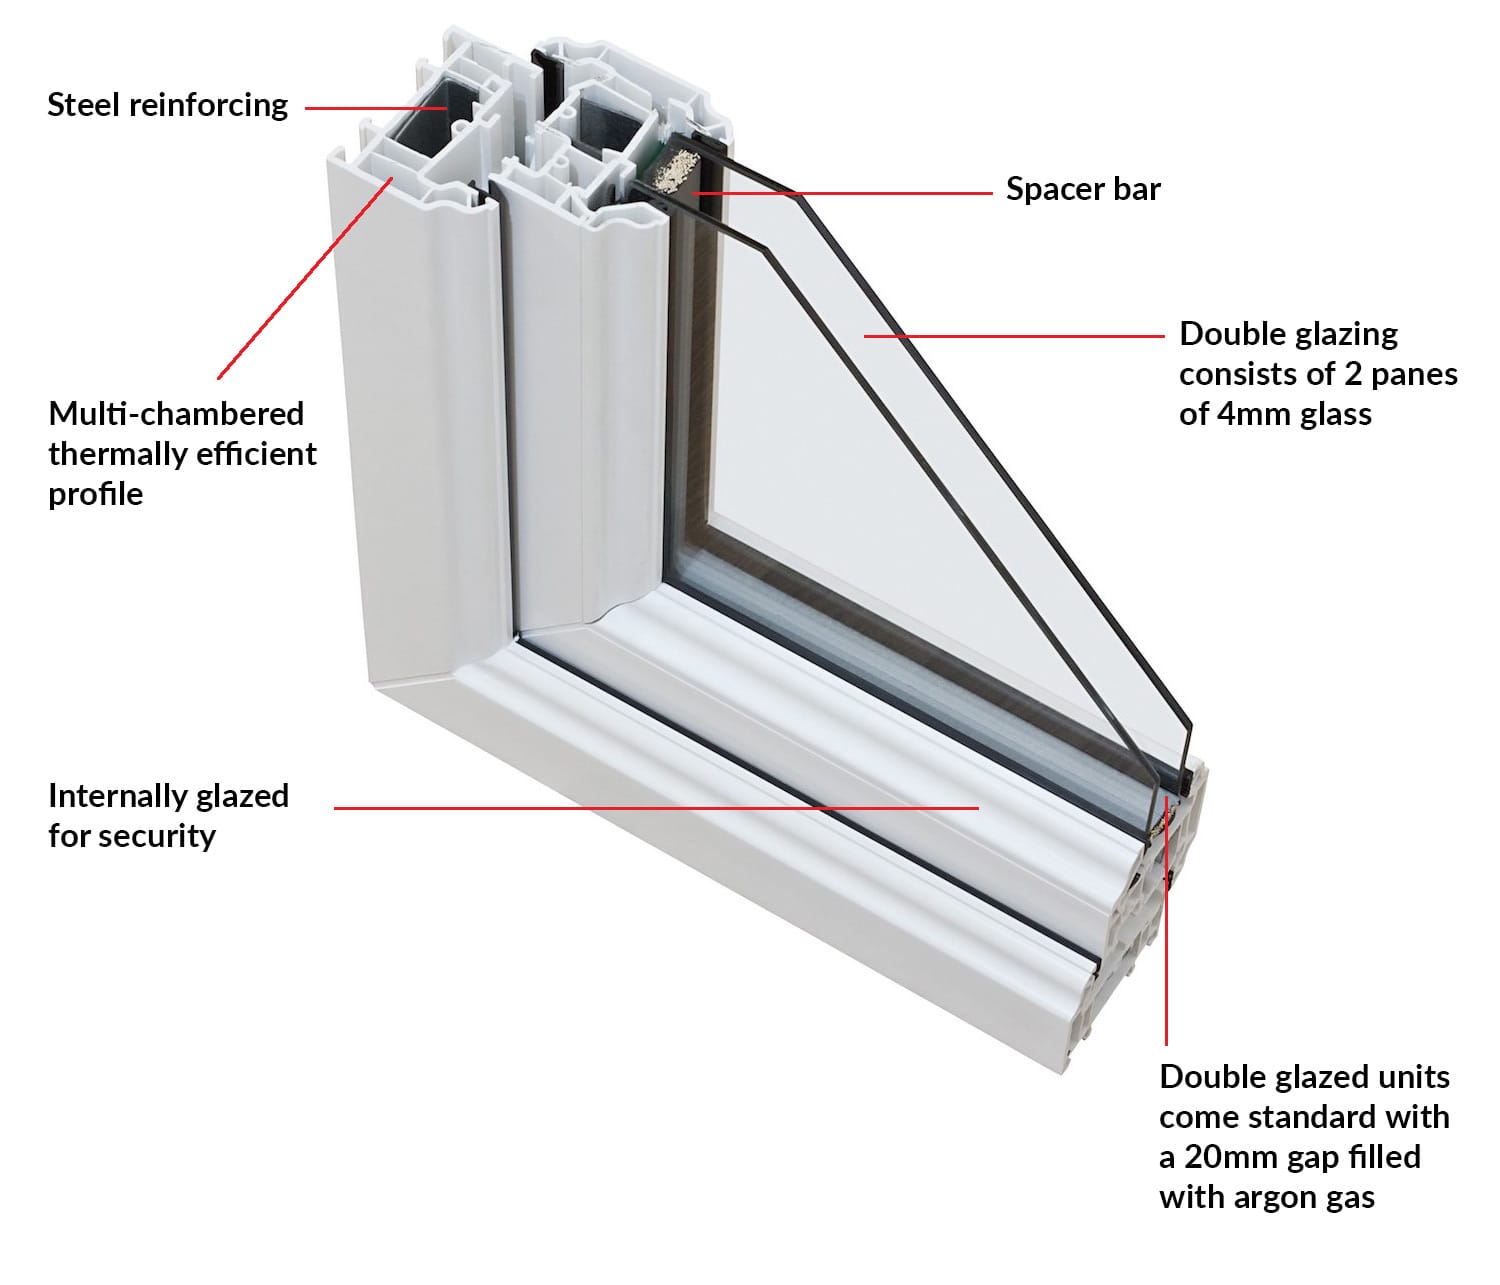 image of a double glazed window section